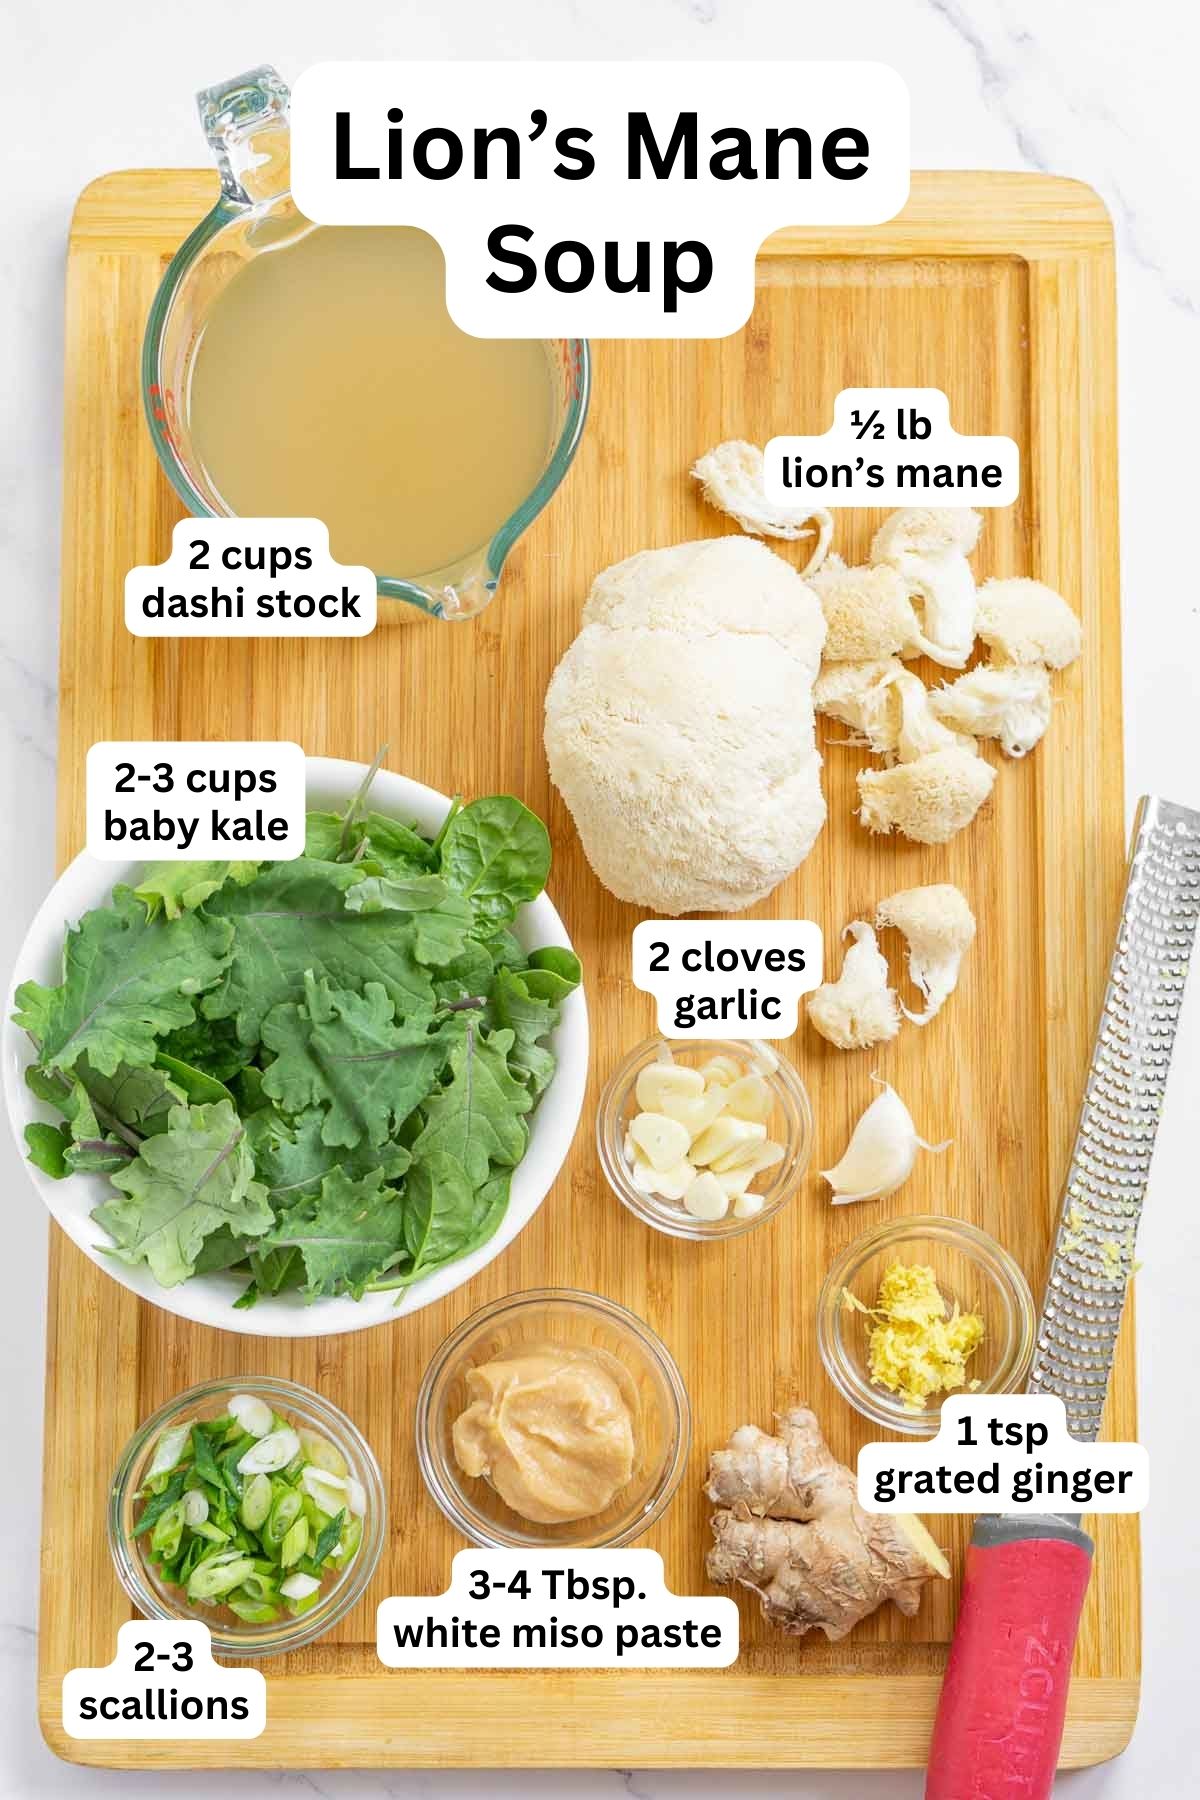 Ingredients to make lion's mane mushroom soup with miso